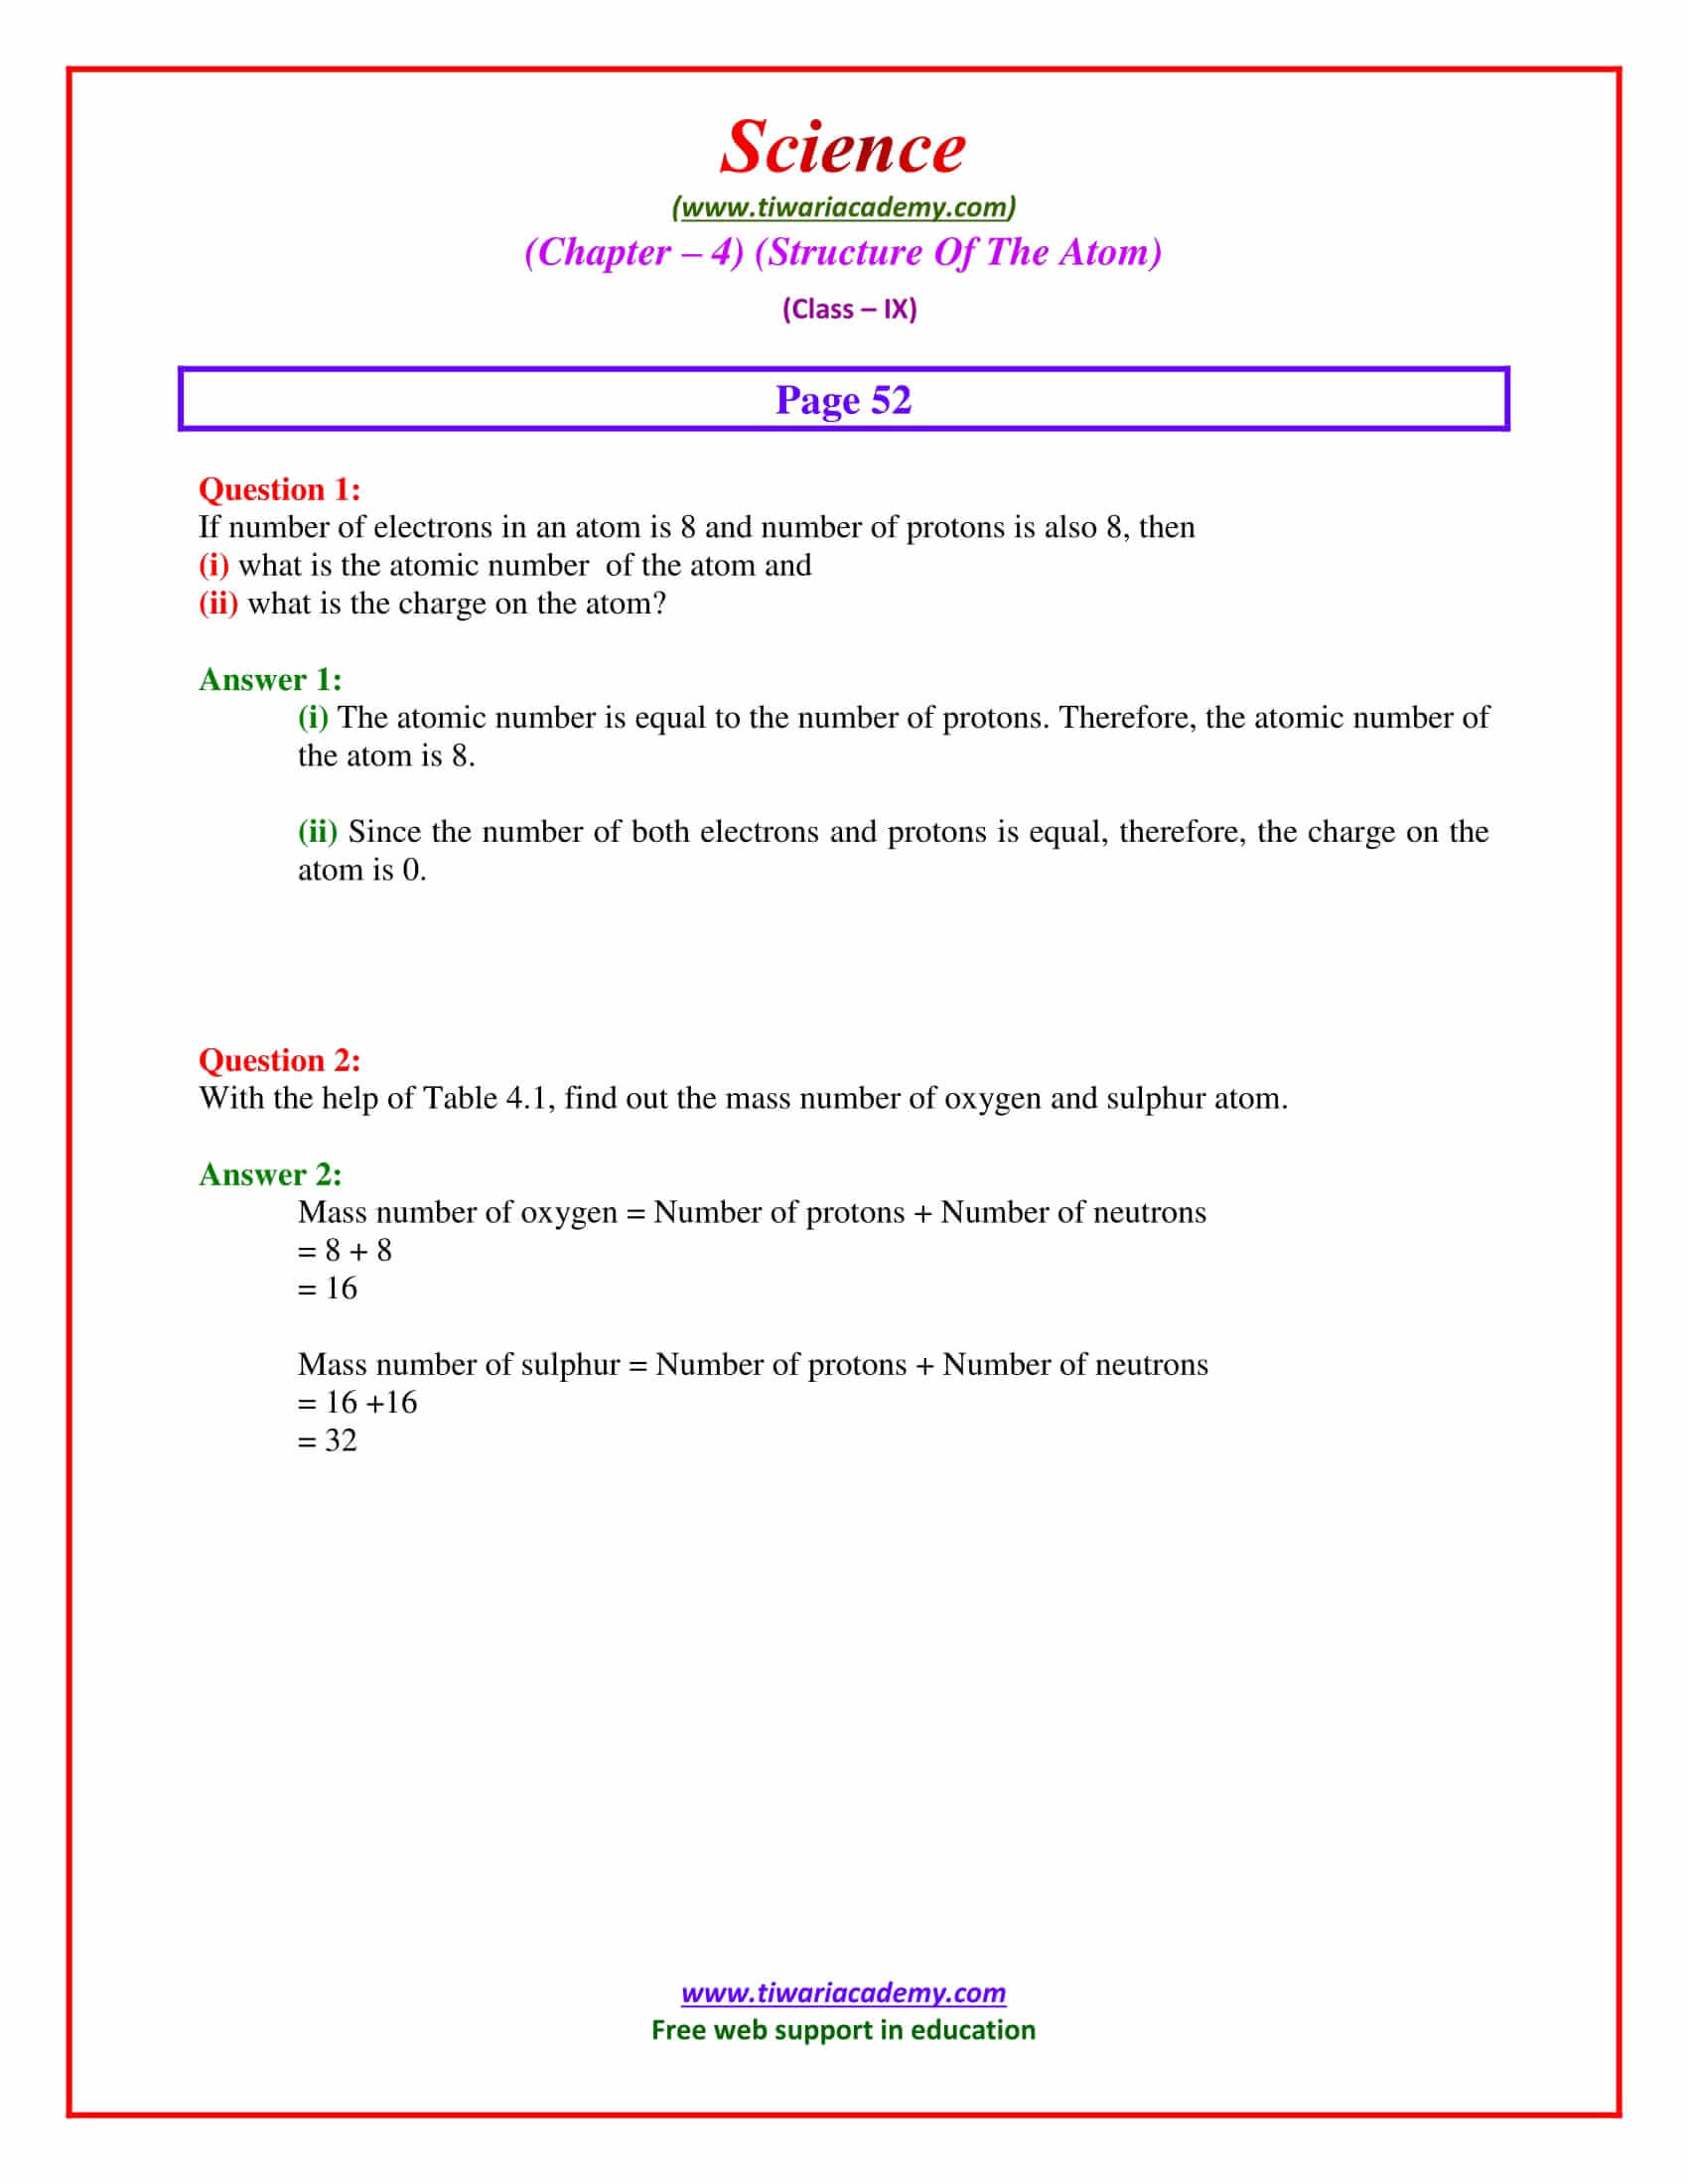 NCERT Solutions for Class 9 Science Chapter 4 intext questions page 52 in pdf form